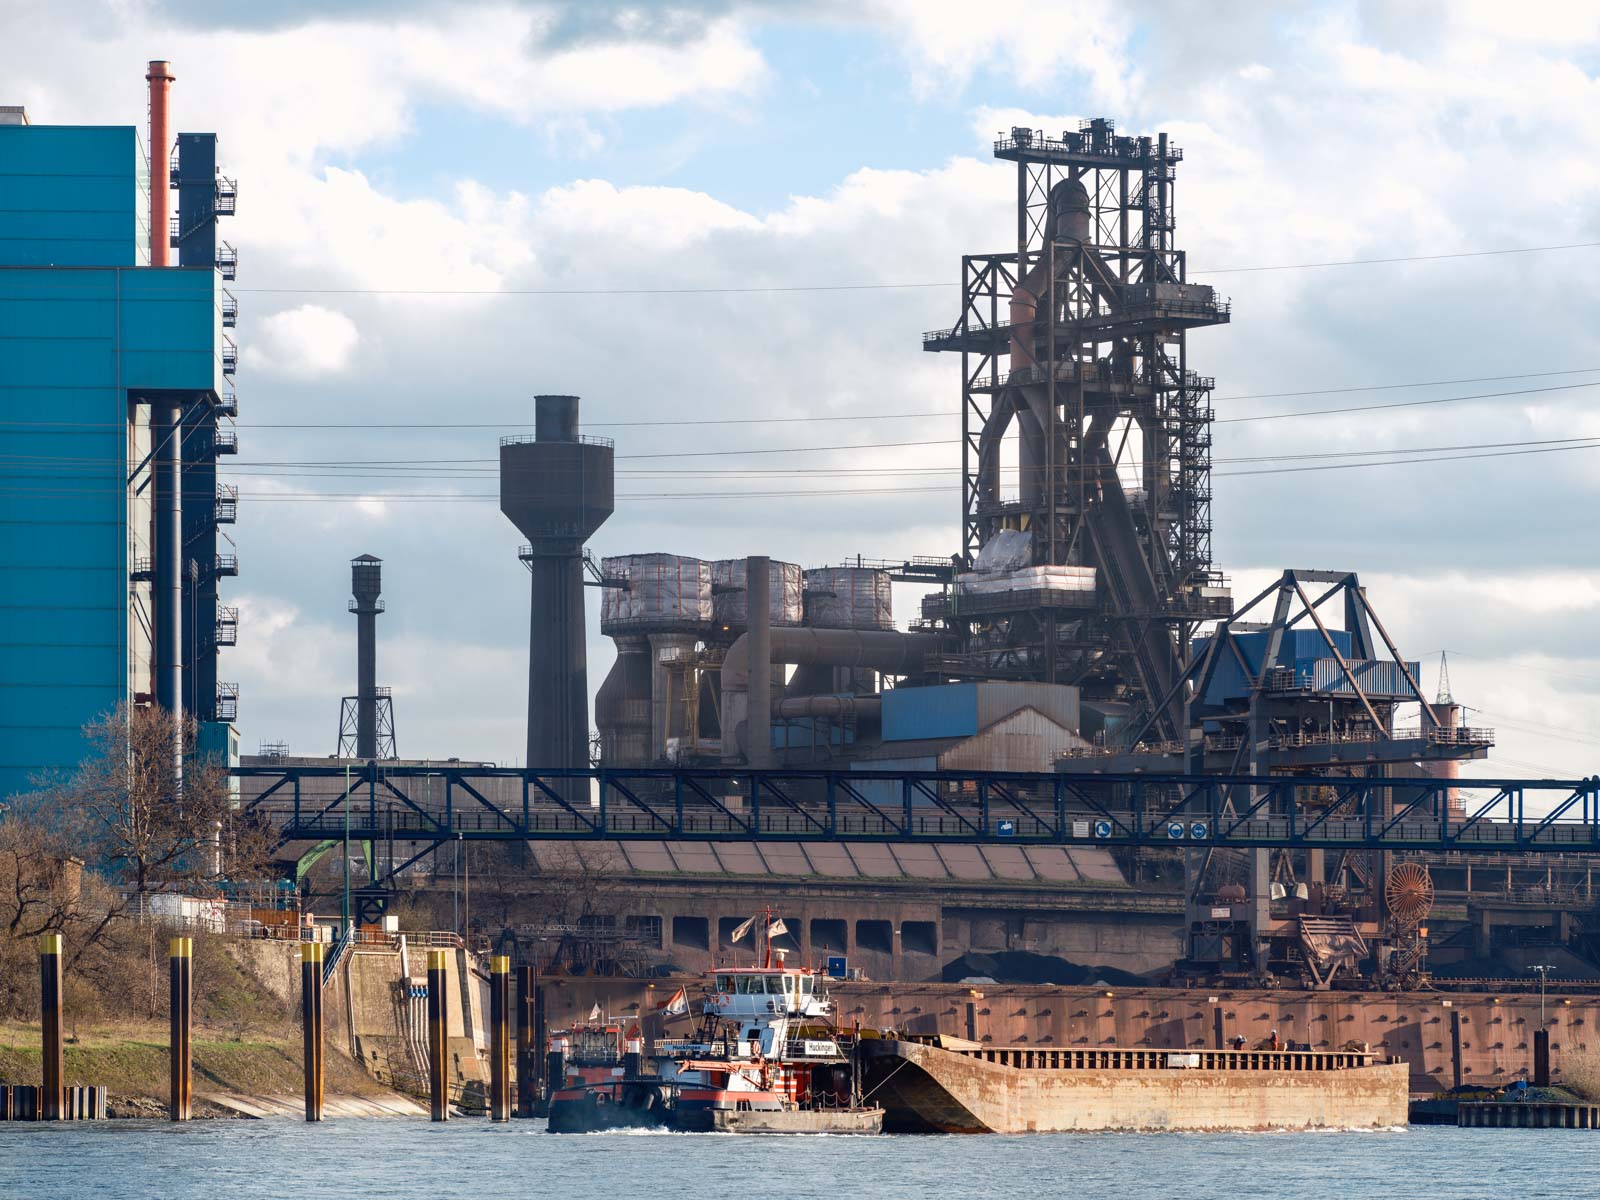 Port and blast furnace at Krupp Mannesmann steelworks (HKM) in Duisburg on the Rhine in the late afternoon in March 2021 (Germany).